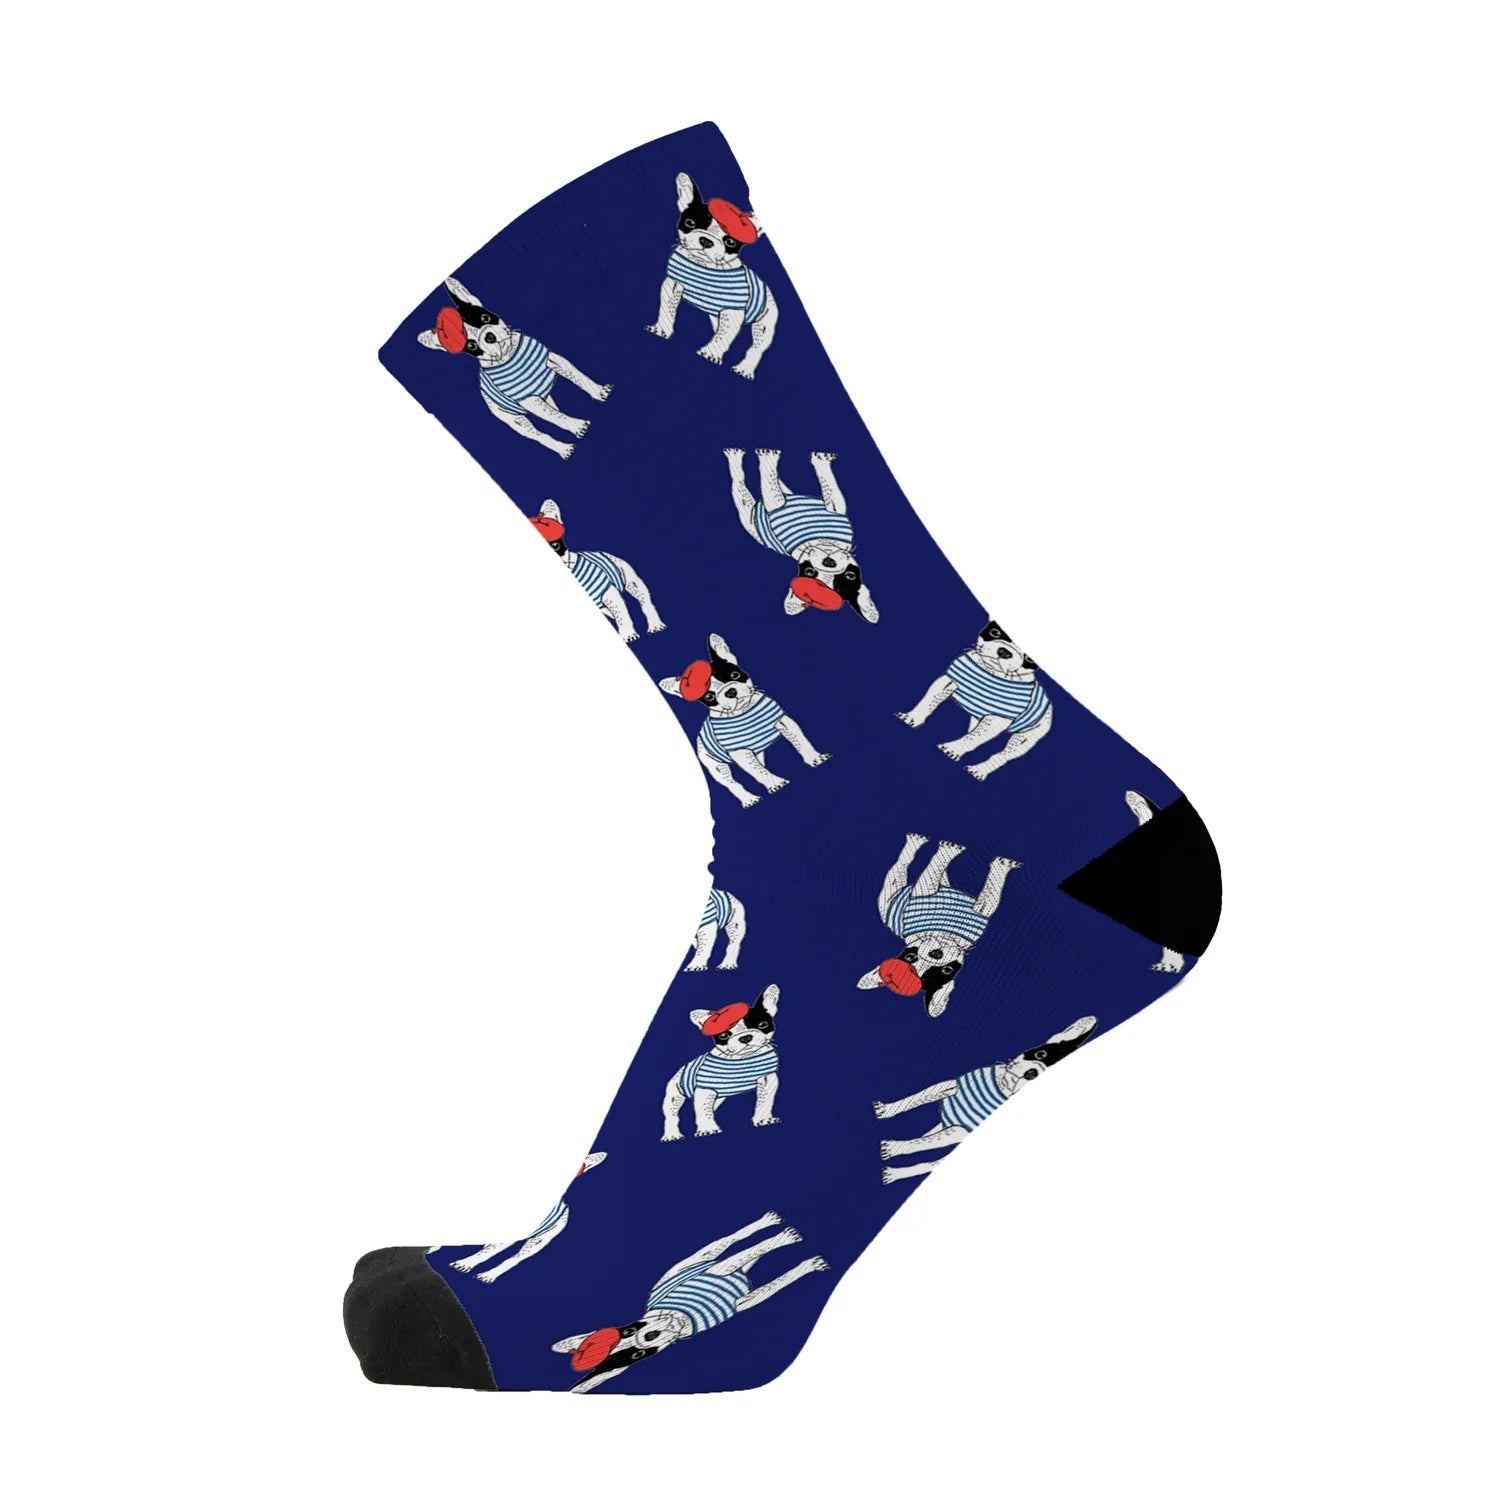 Shop Bamboo Socks | French Frenchie - Red Fox Sox